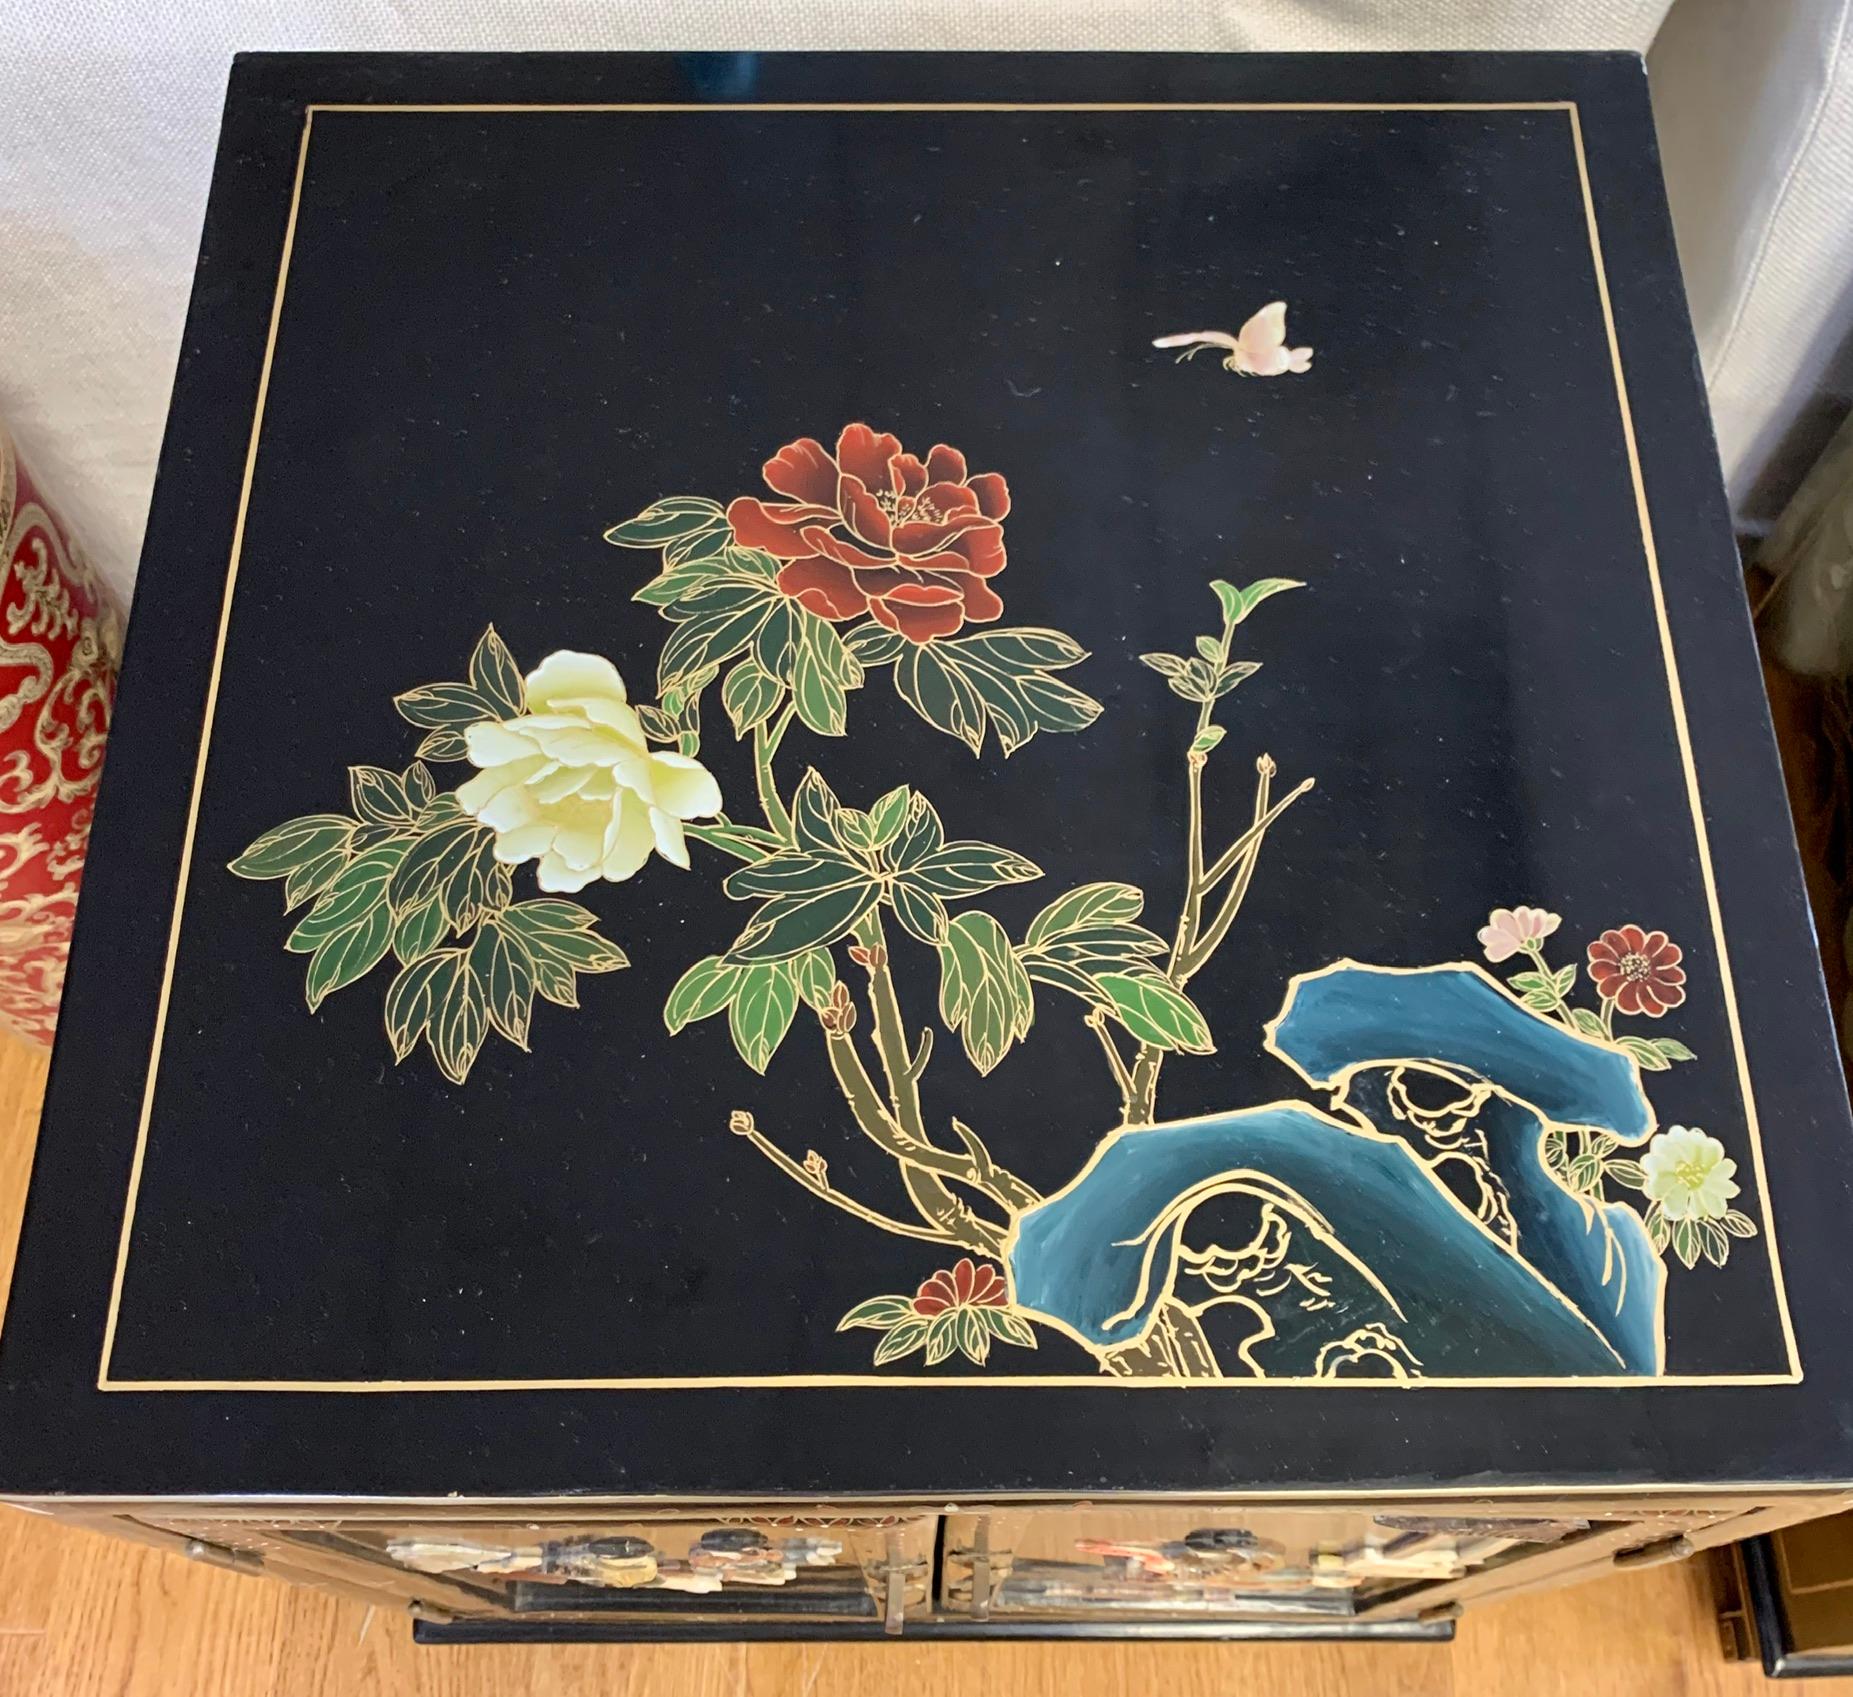 Elegant pair of chinoiserie black and gold lacquered chests/cabinets/end table or nightstands. Features carved hardstone figures on front doors and hand painted flowers and details throughout. Fitted glass on top. Gorgeous lines and better scale.